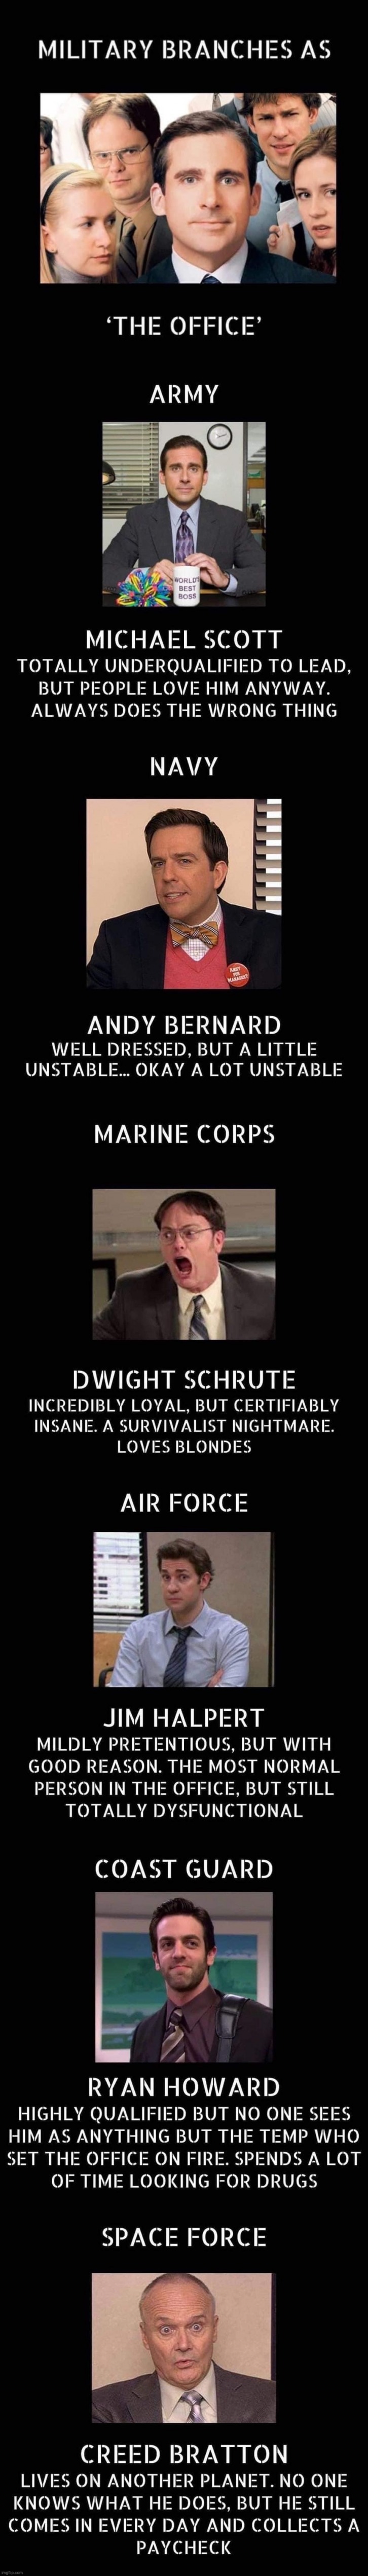 Military branches as the Office Blank Meme Template